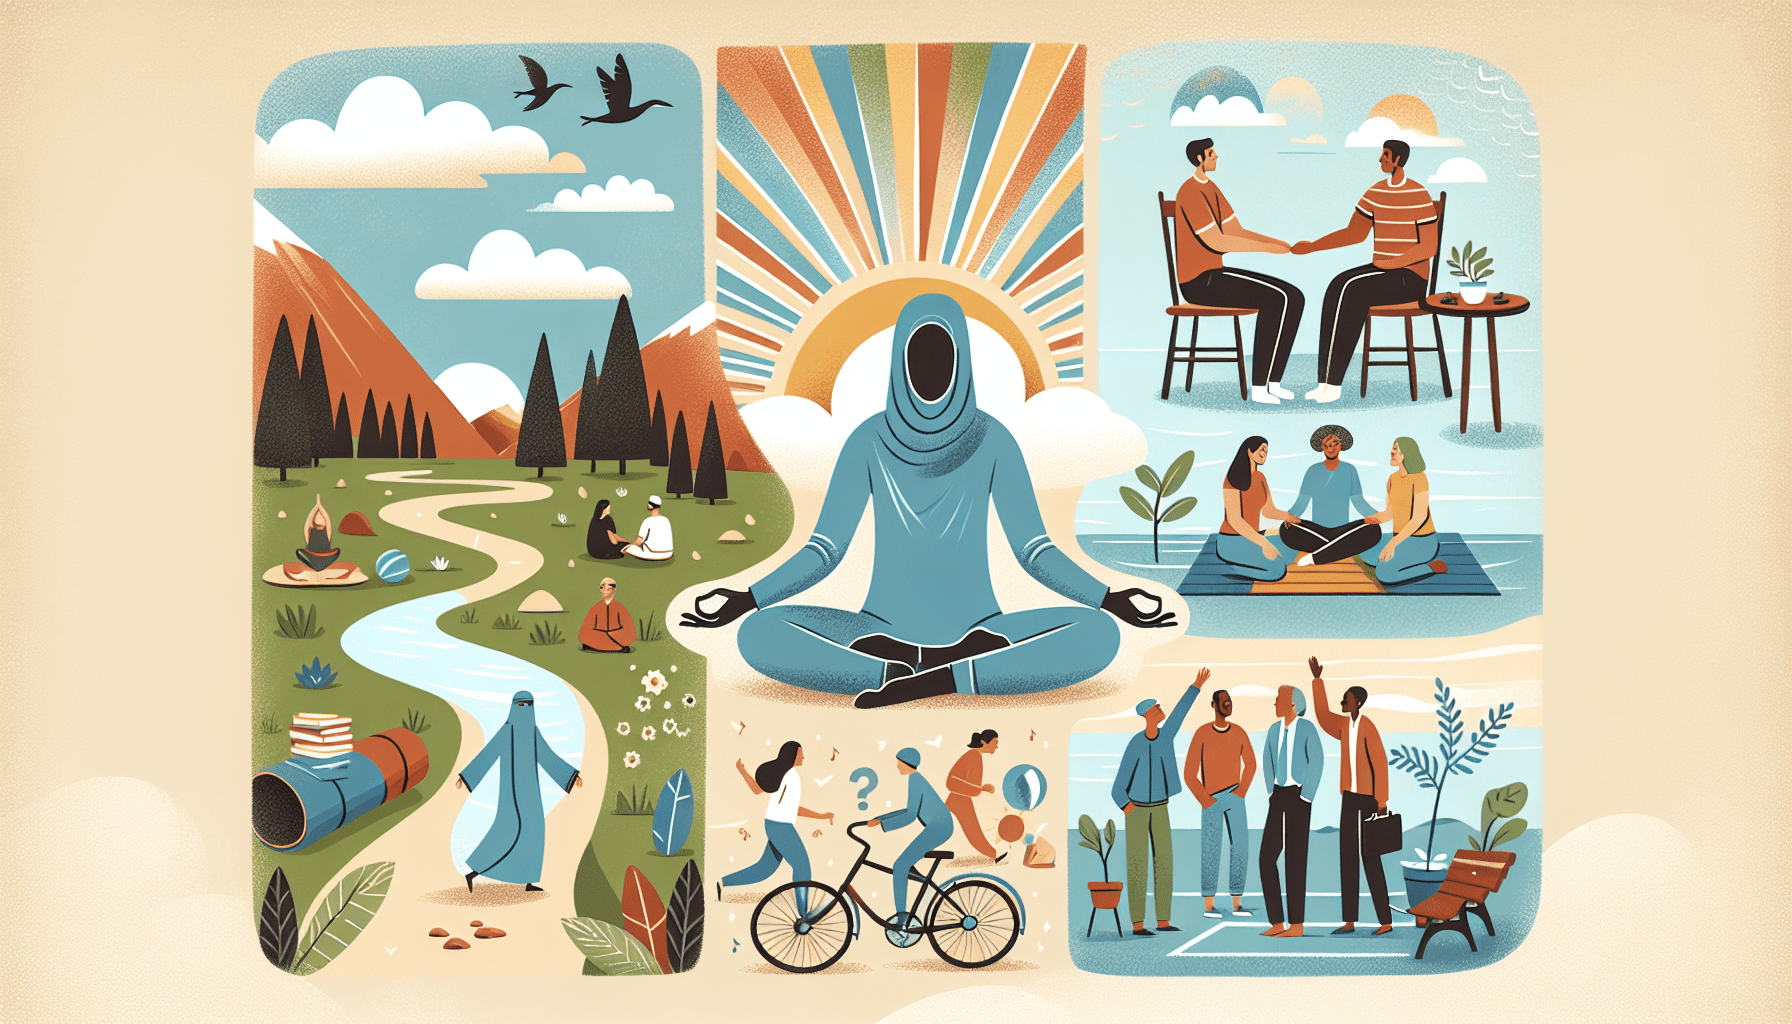 Illustrative image featuring various scenes of people engaging in different wellness activities: meditating in natural landscapes, practicing yoga, holding hands in conversation, studying, biking, and interacting in urban settings, unified by themes of harmony and balance.